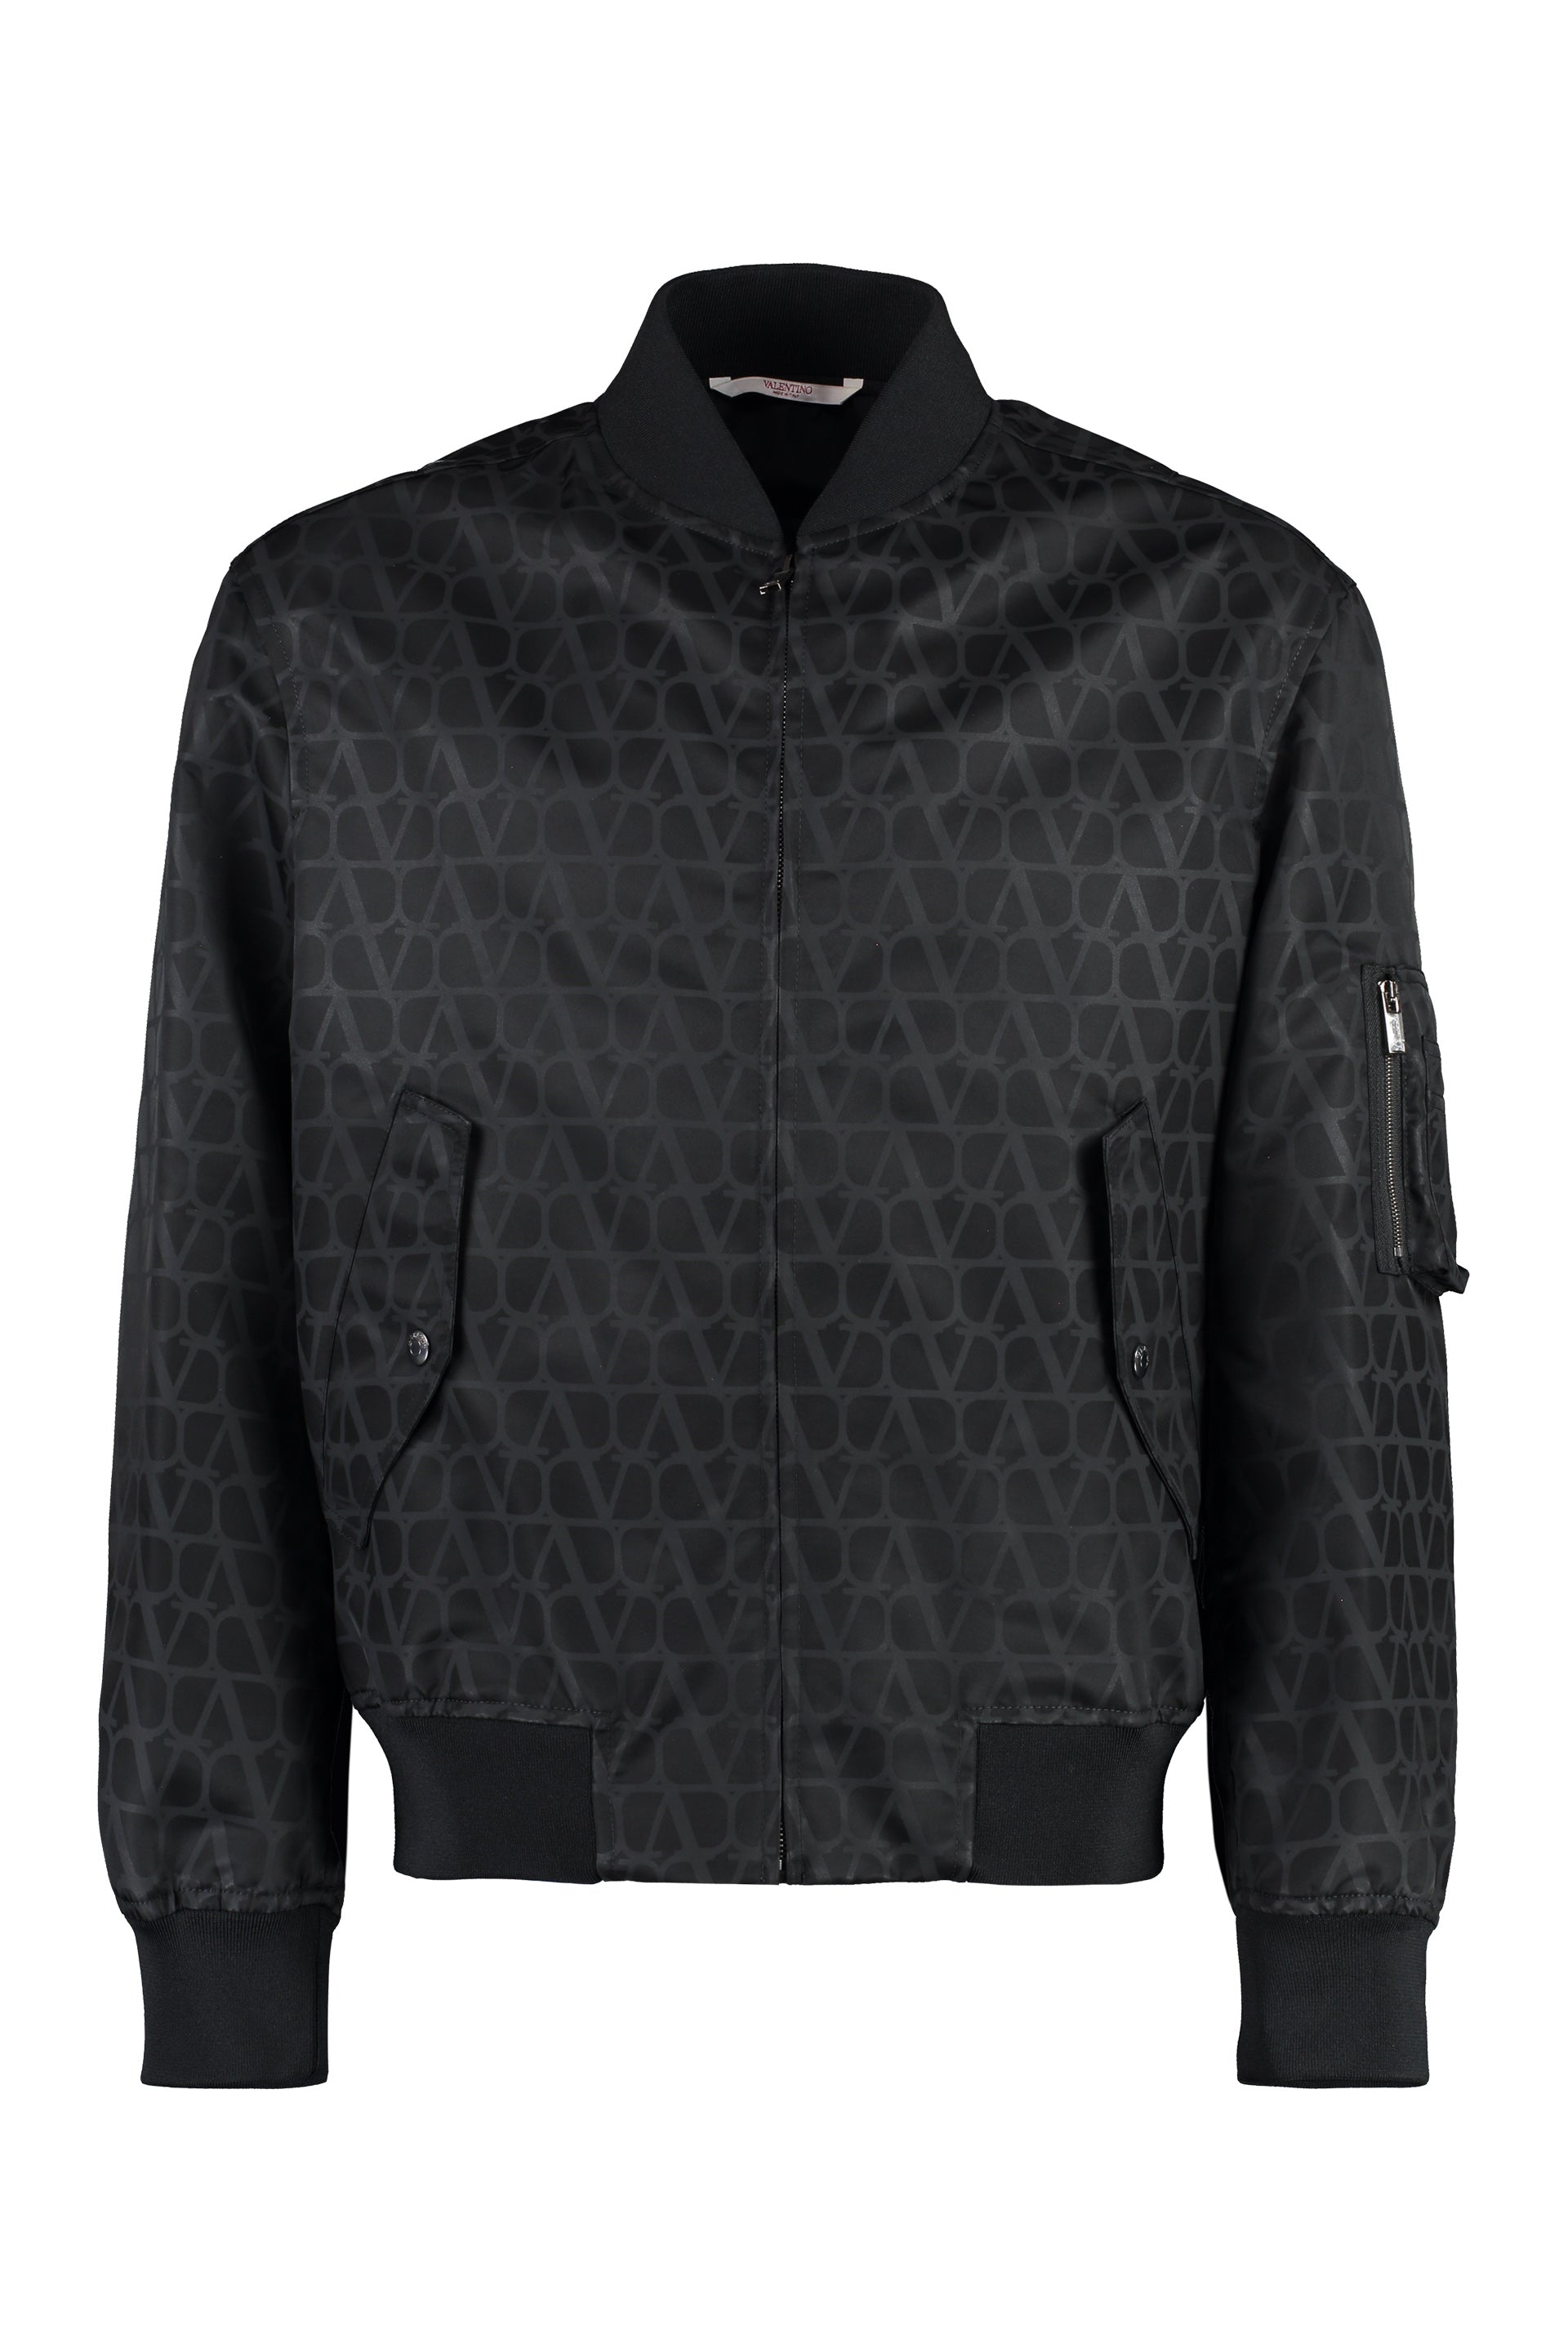 Valentino Black Nylon Bomber Jacket With Iconic Motif And Practical Features For Men